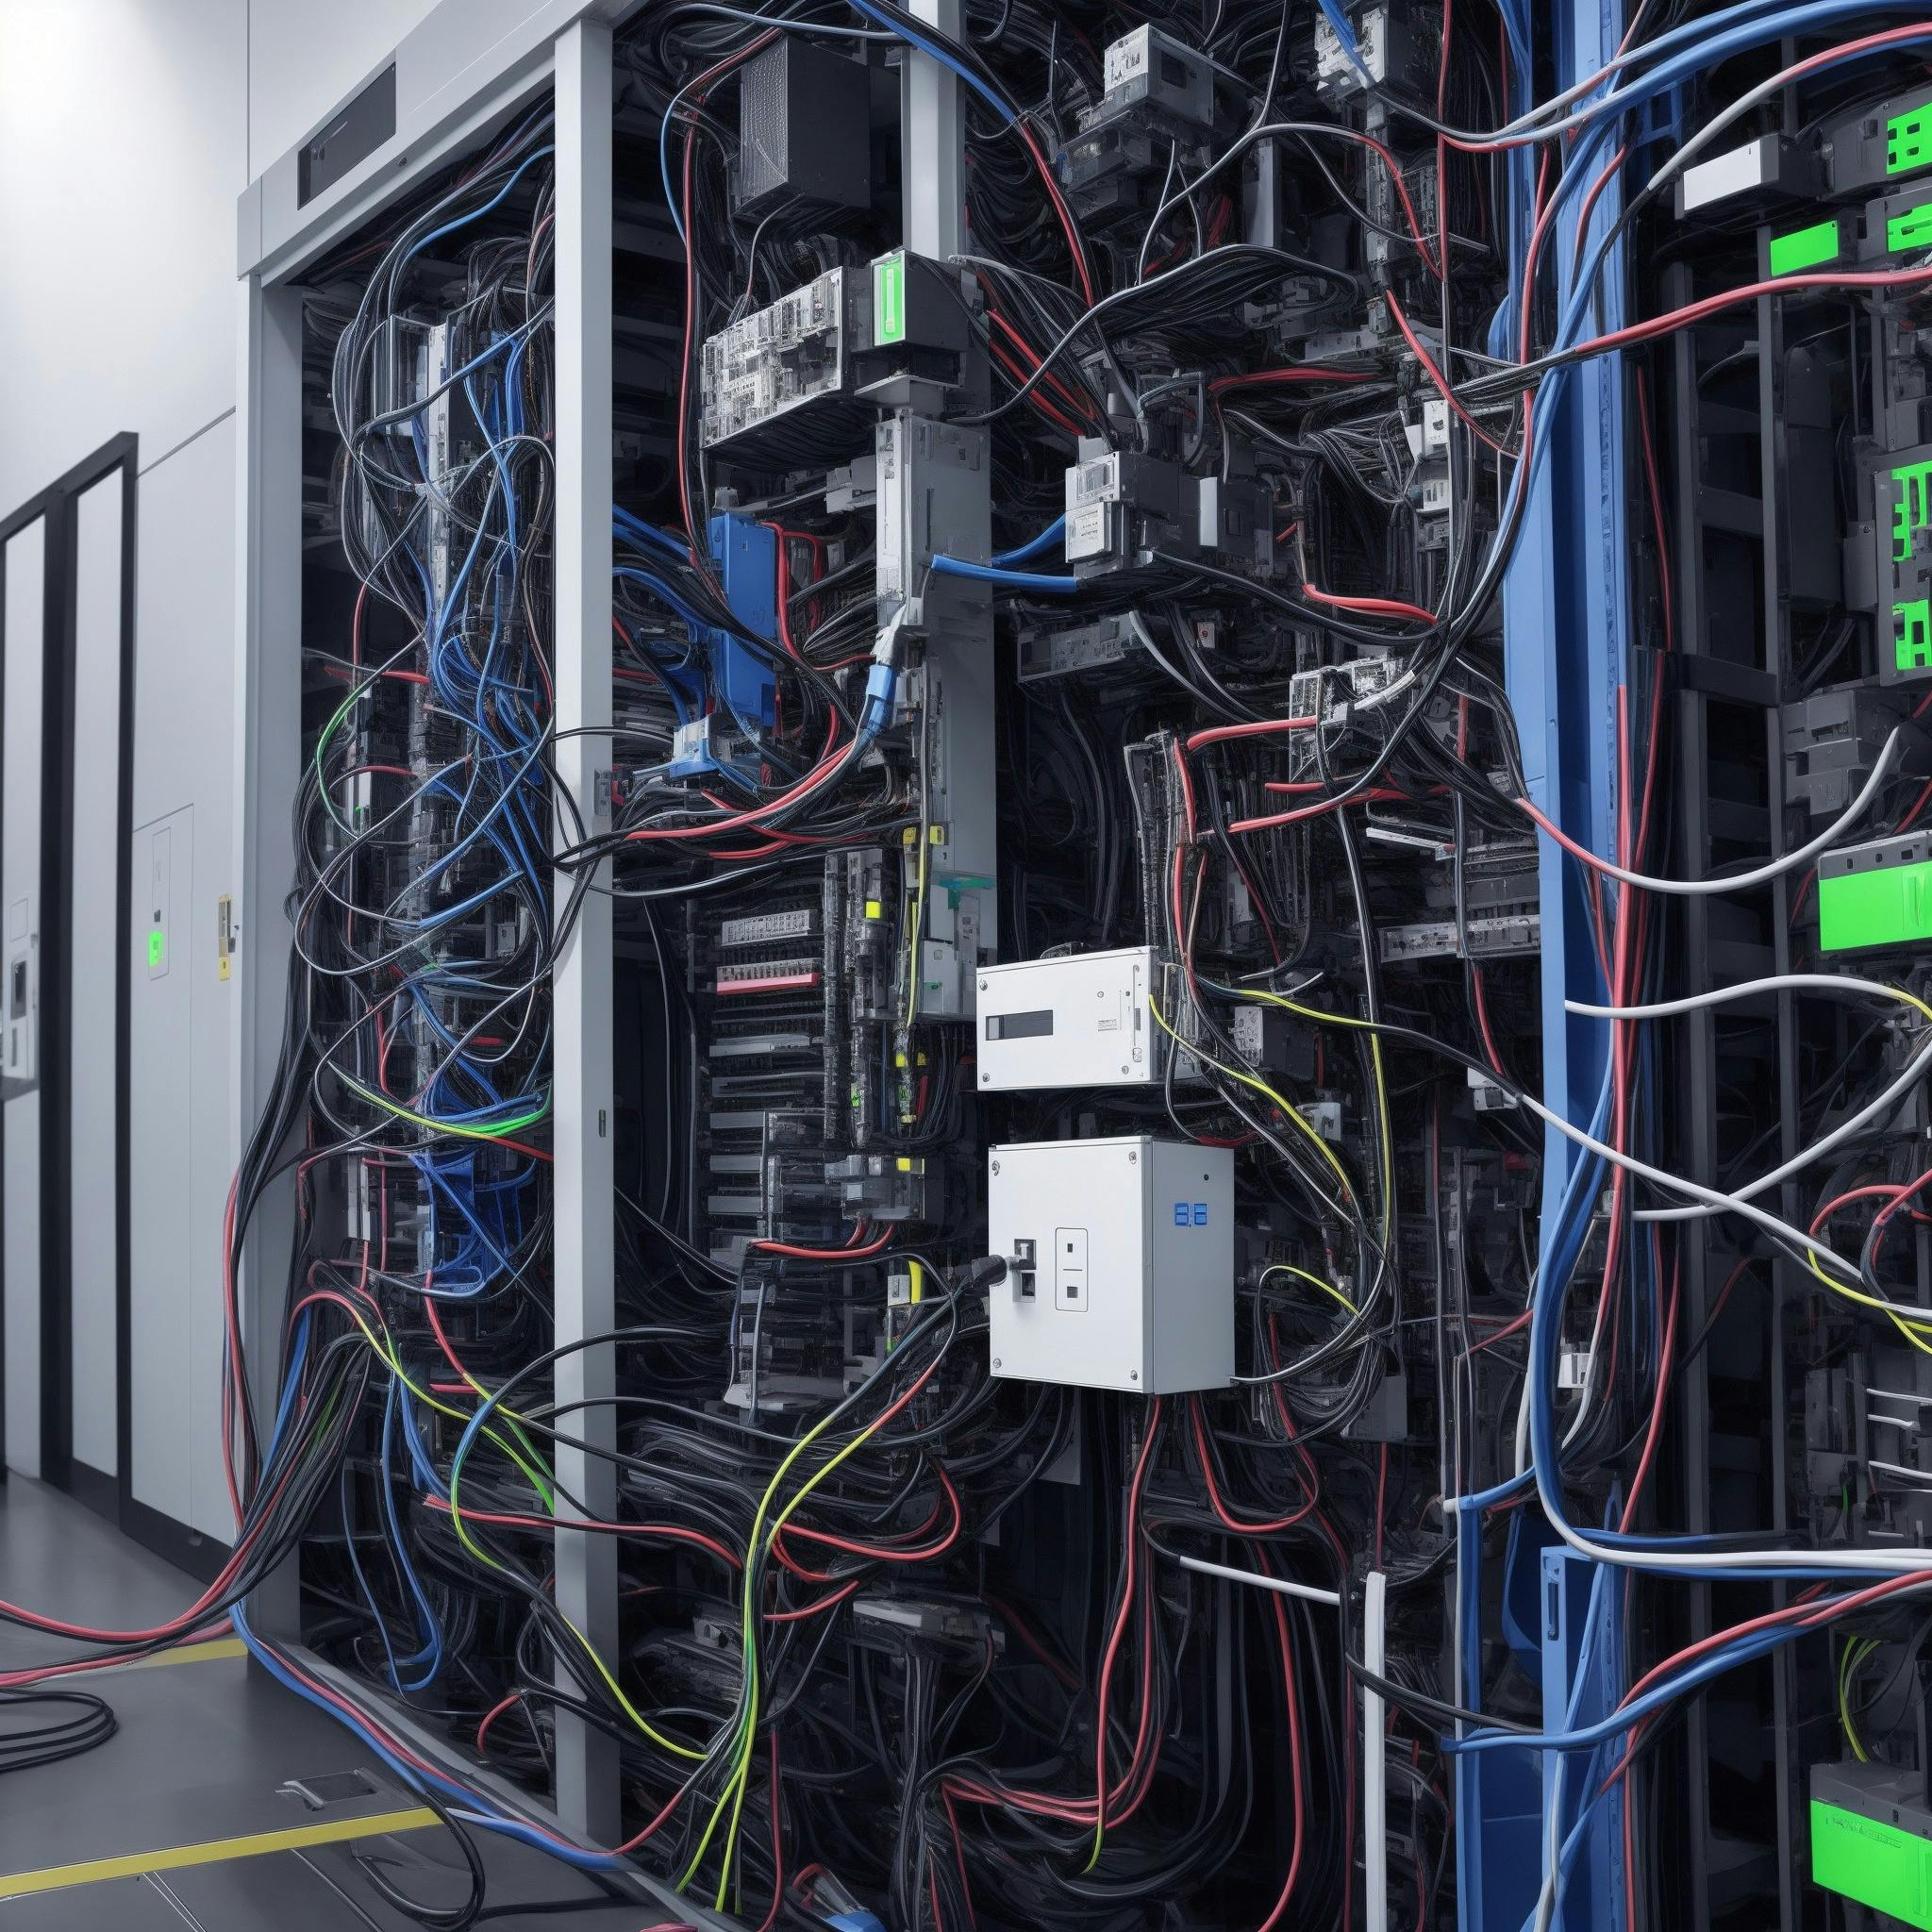 Pulling the plug on a data center - if and when it's necessary.